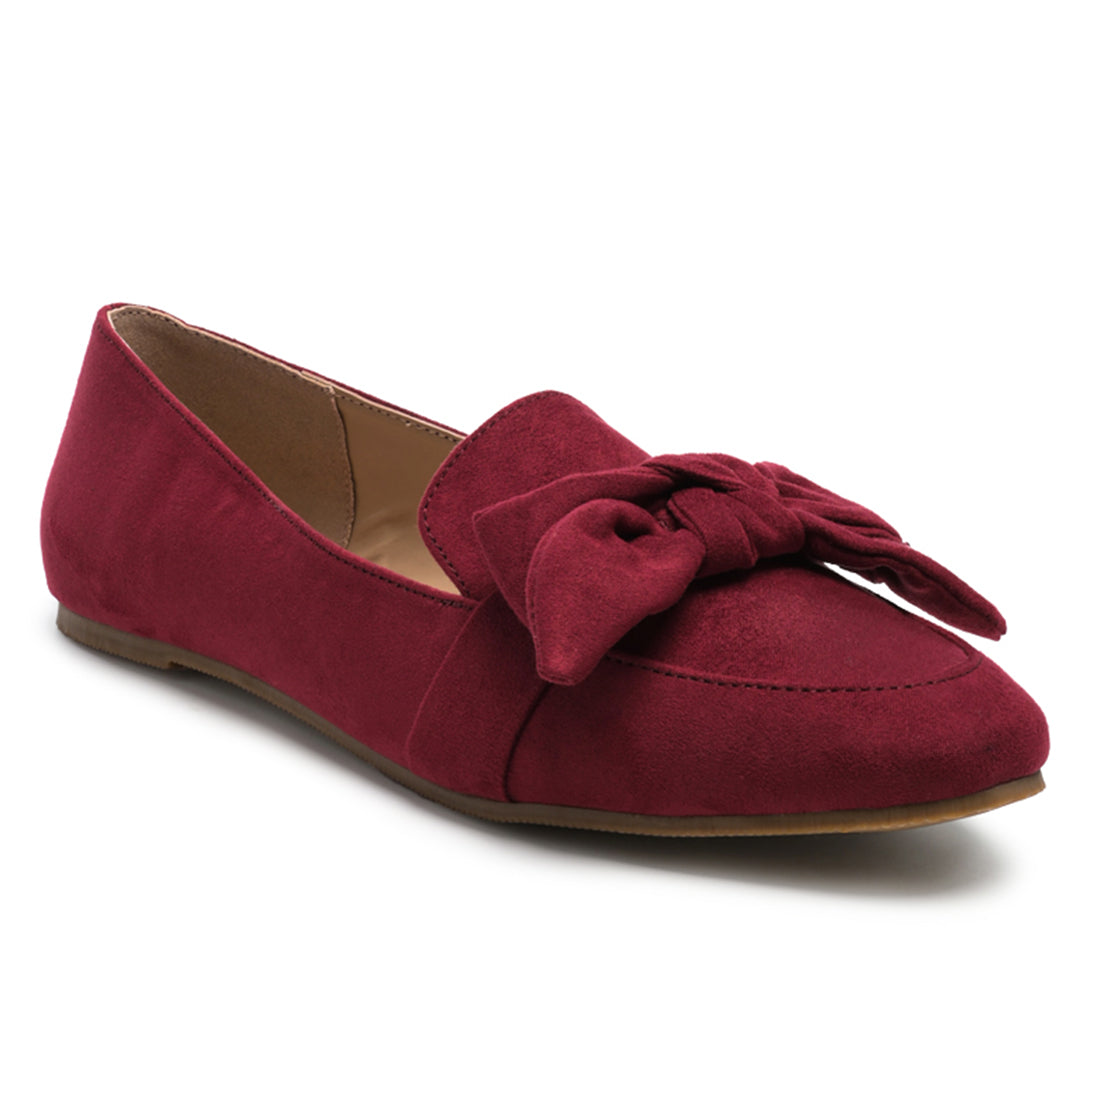 Pointed Toe Loafers in Burgundy - Burgundy